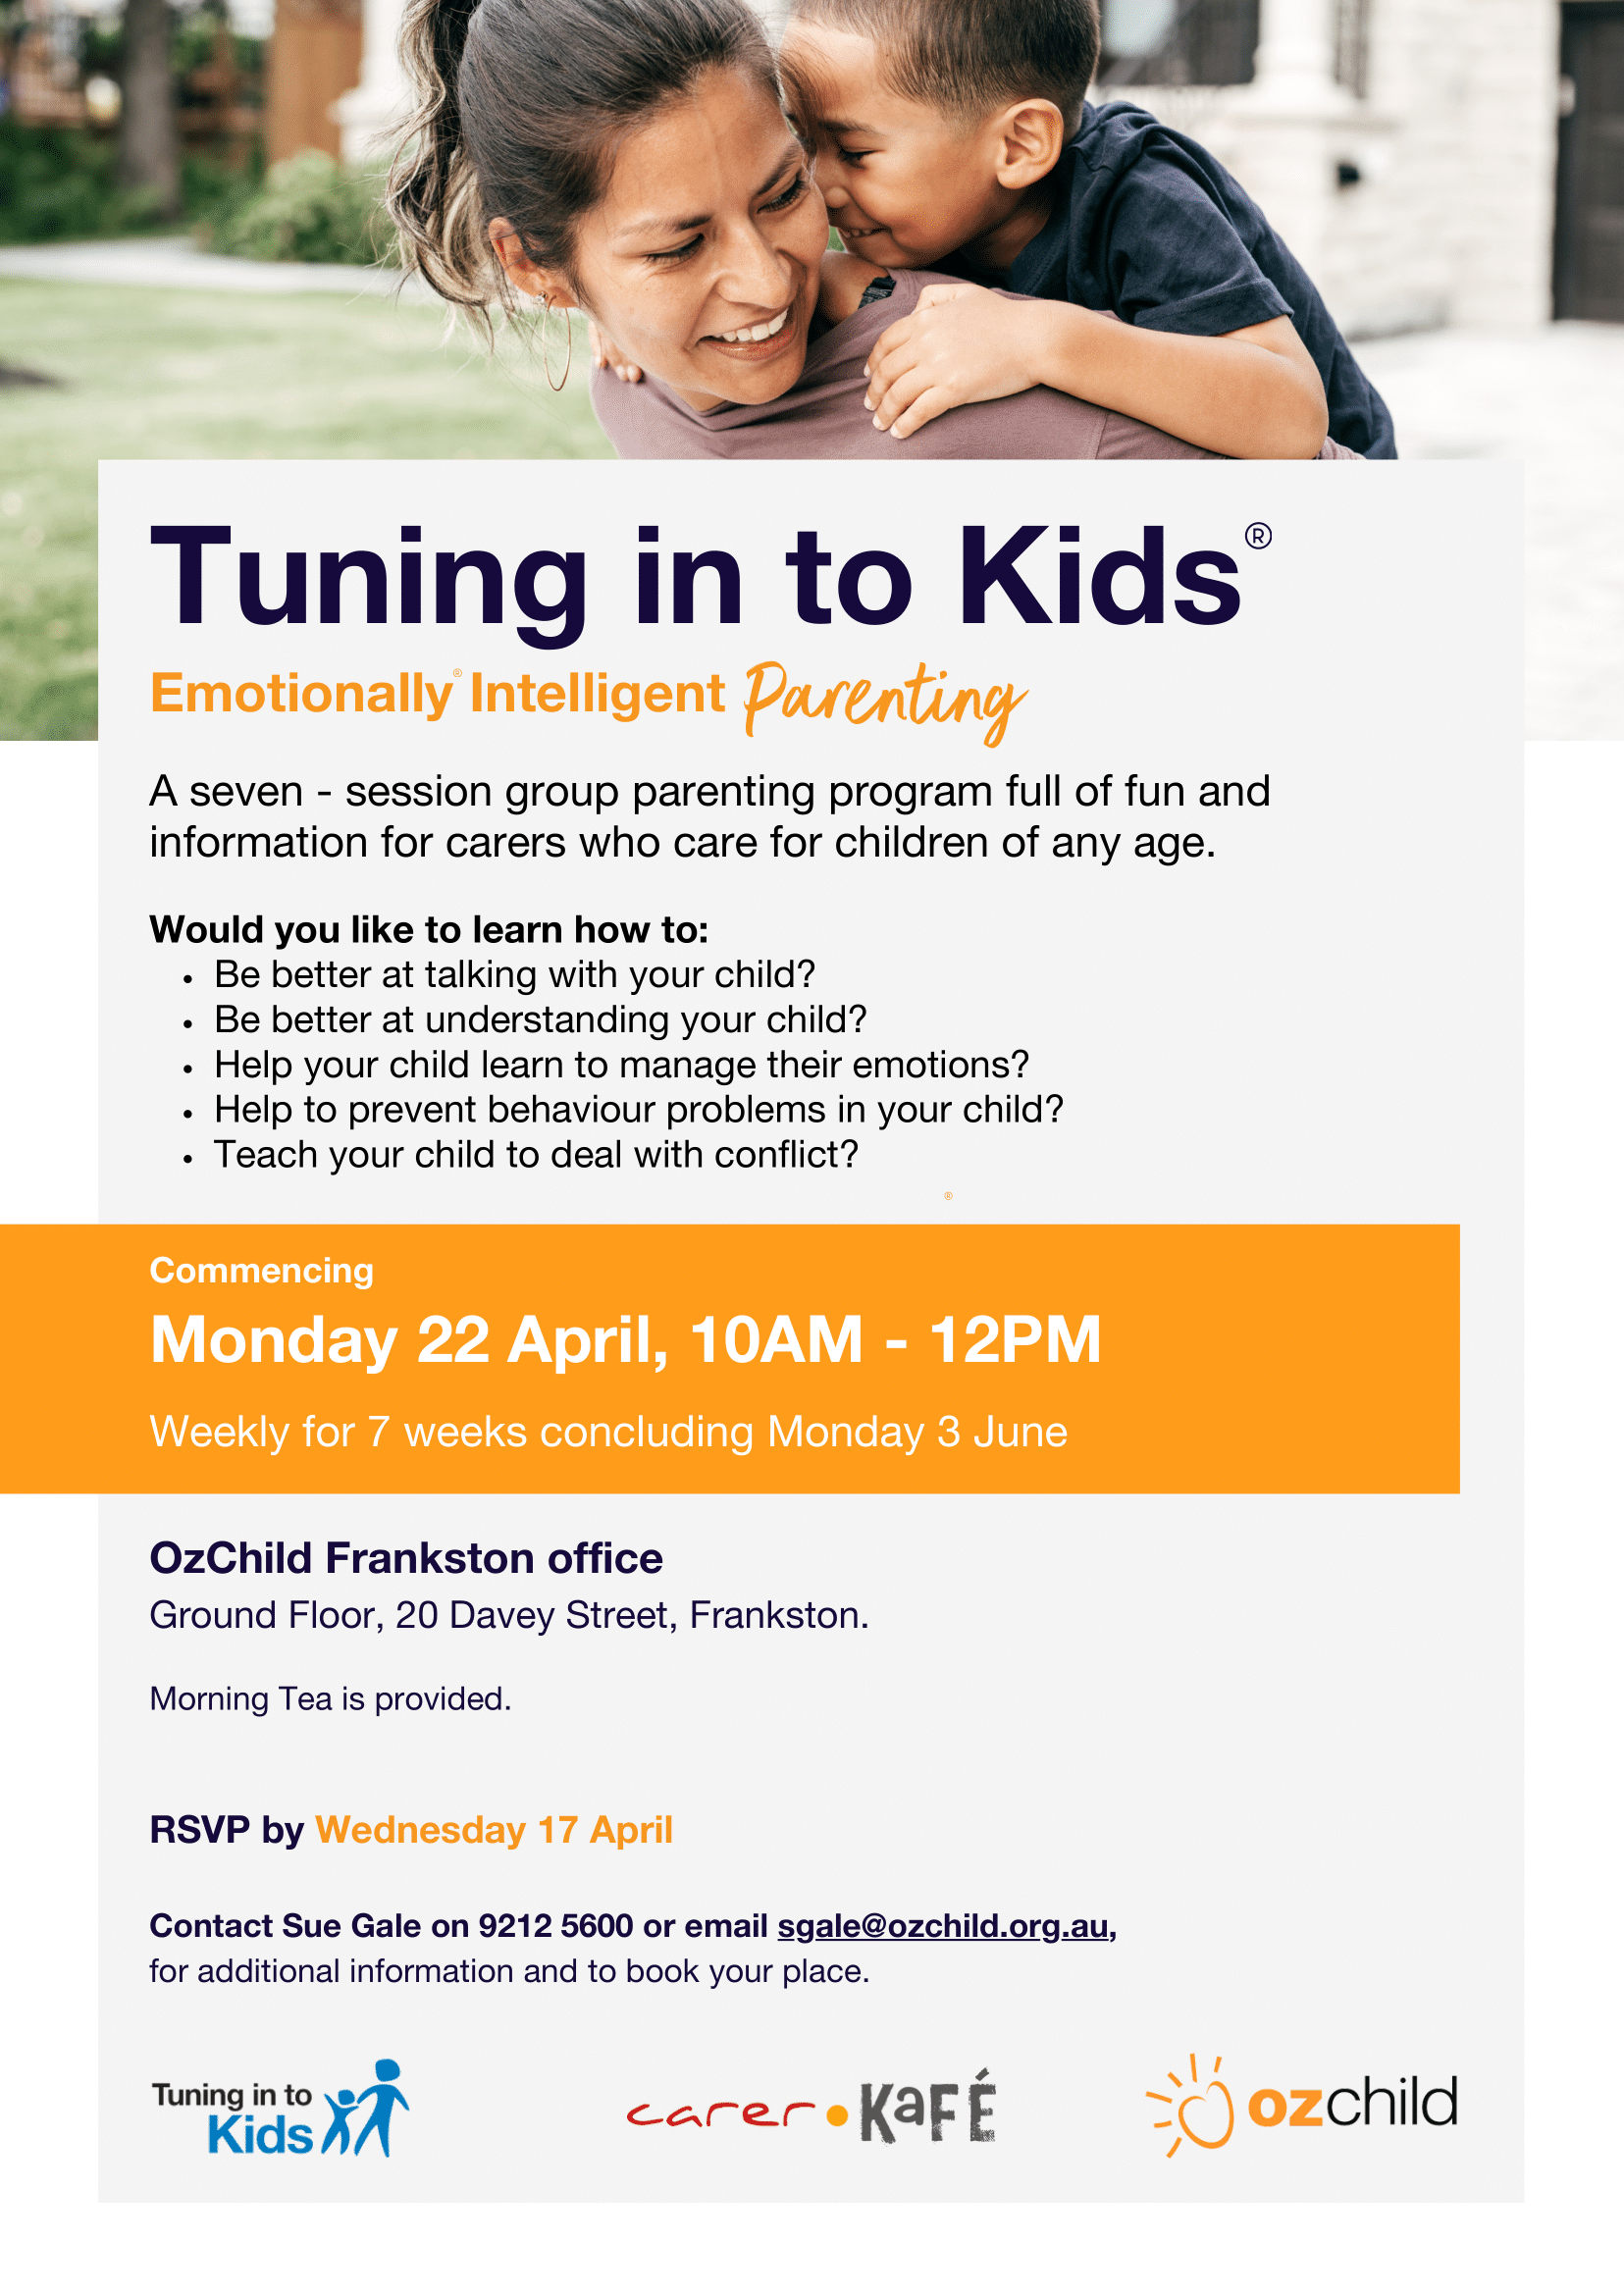 FC_TuningInToKidsFeb24_ParentingSessions_A4Flyer-1.png